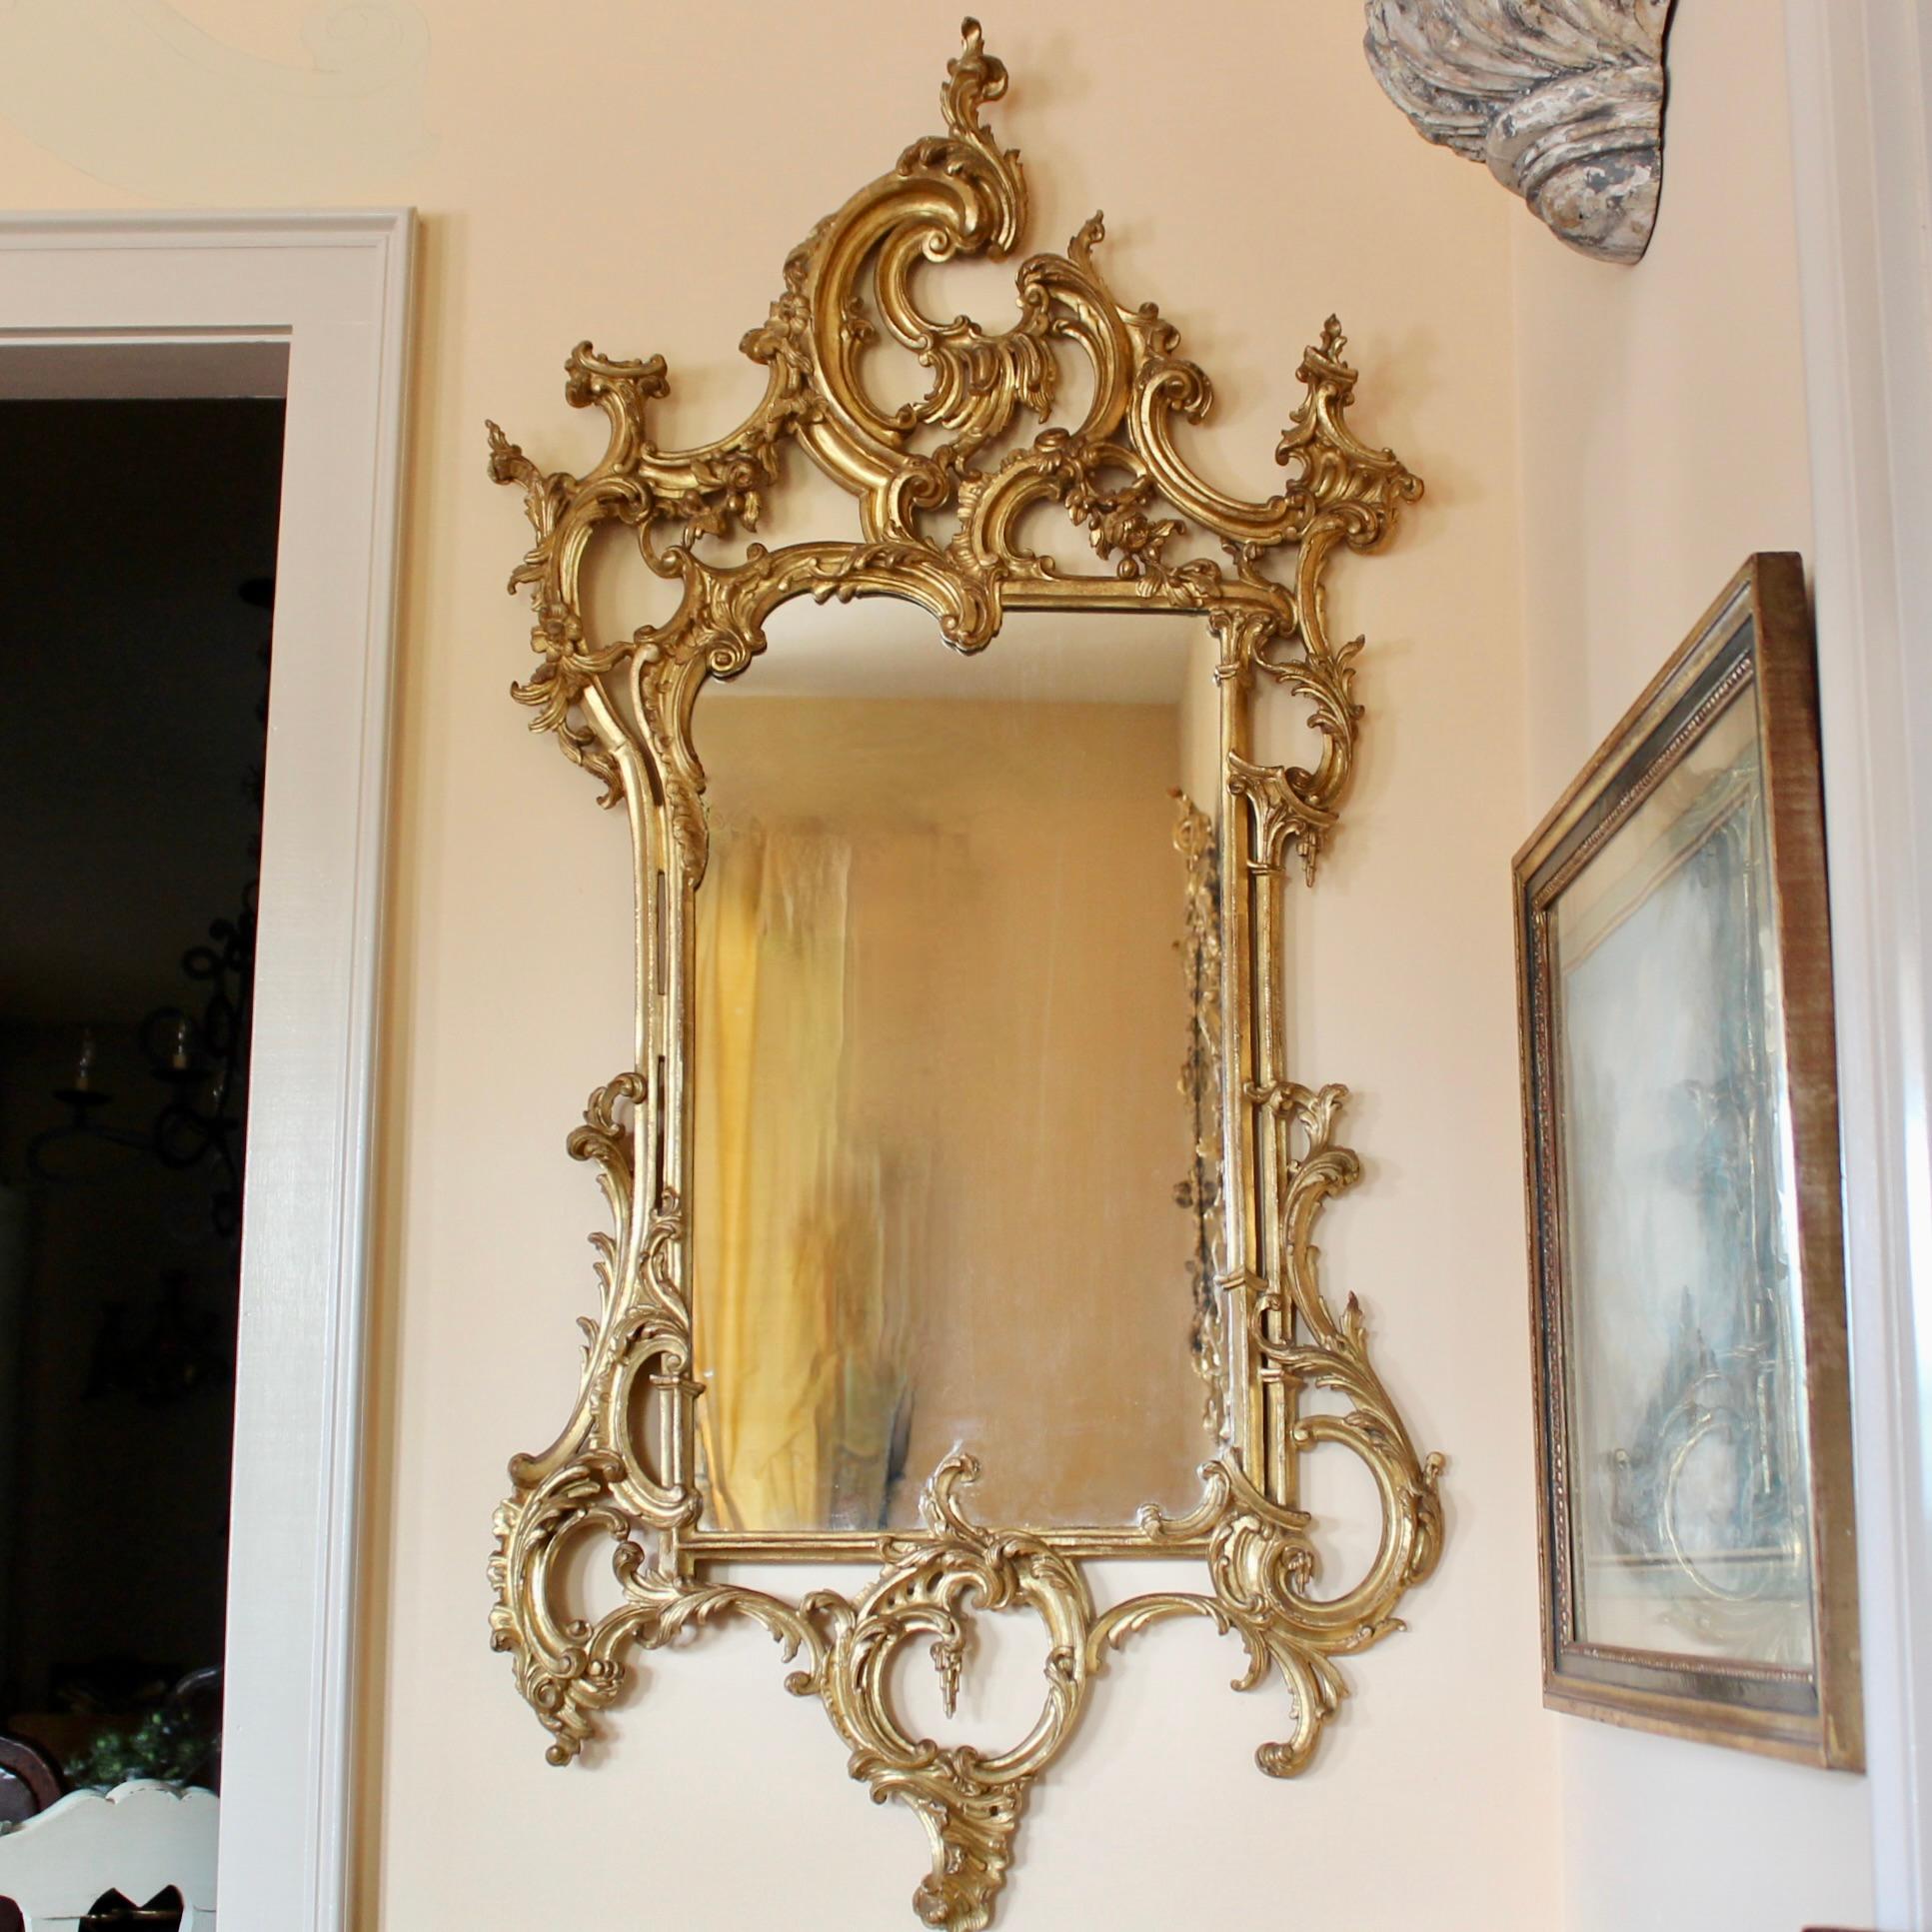 A finely carved Italian giltwood mirror in the George III style with exuberant asymmetrical Rococo motifs well executed and well balanced. Good condition. The gilding is bright with light wear and small losses and minor distress. Mirror plate with